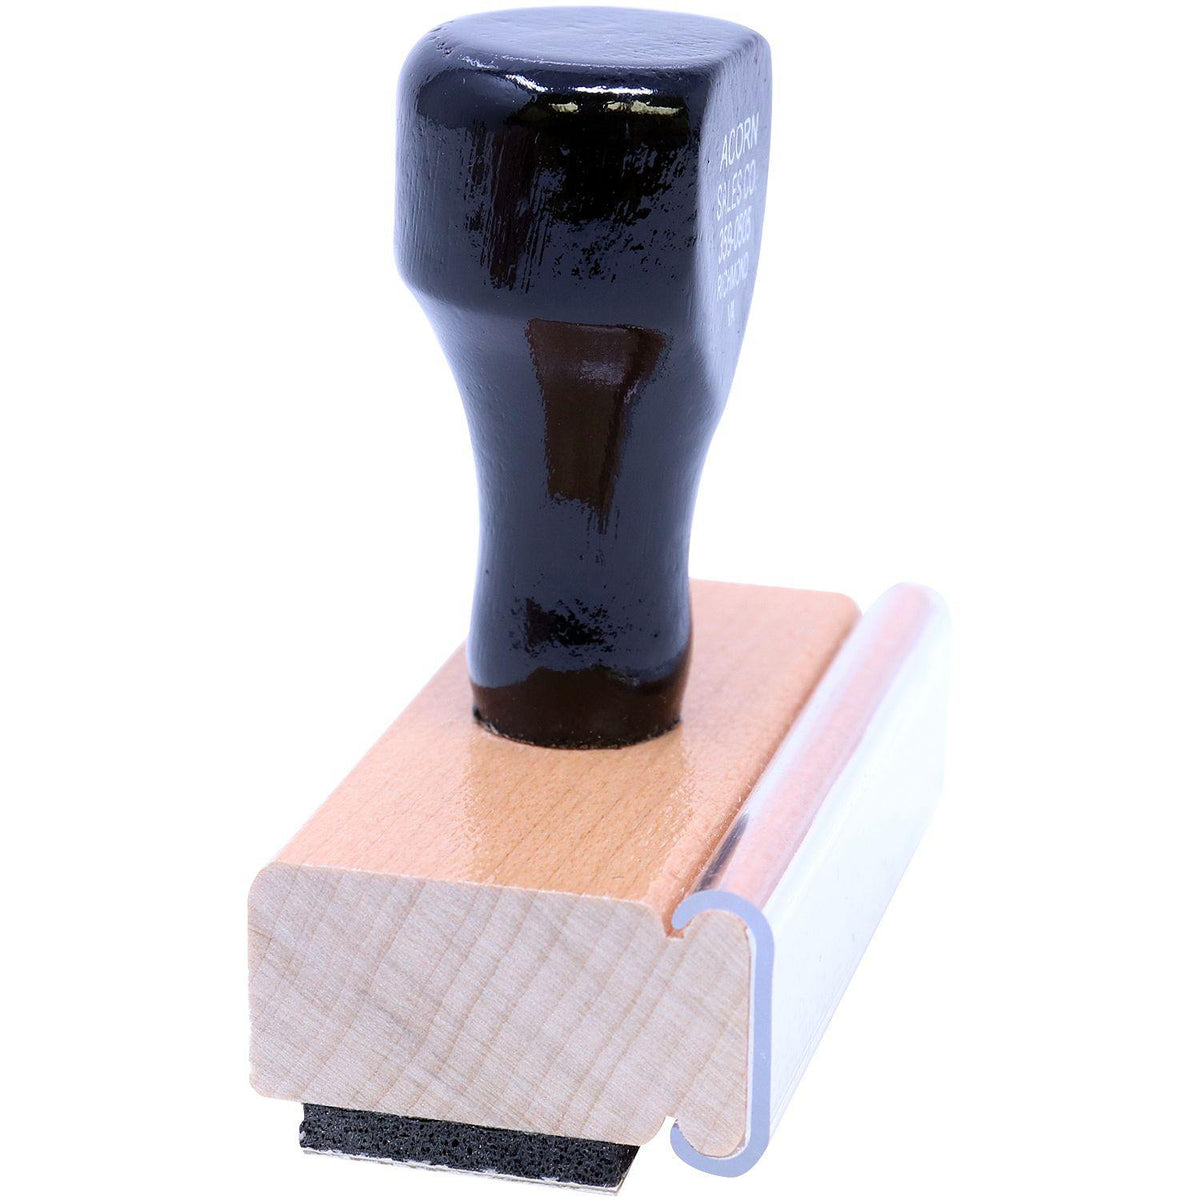 Side View of Large Hypertension Rubber Stamp at an Angle